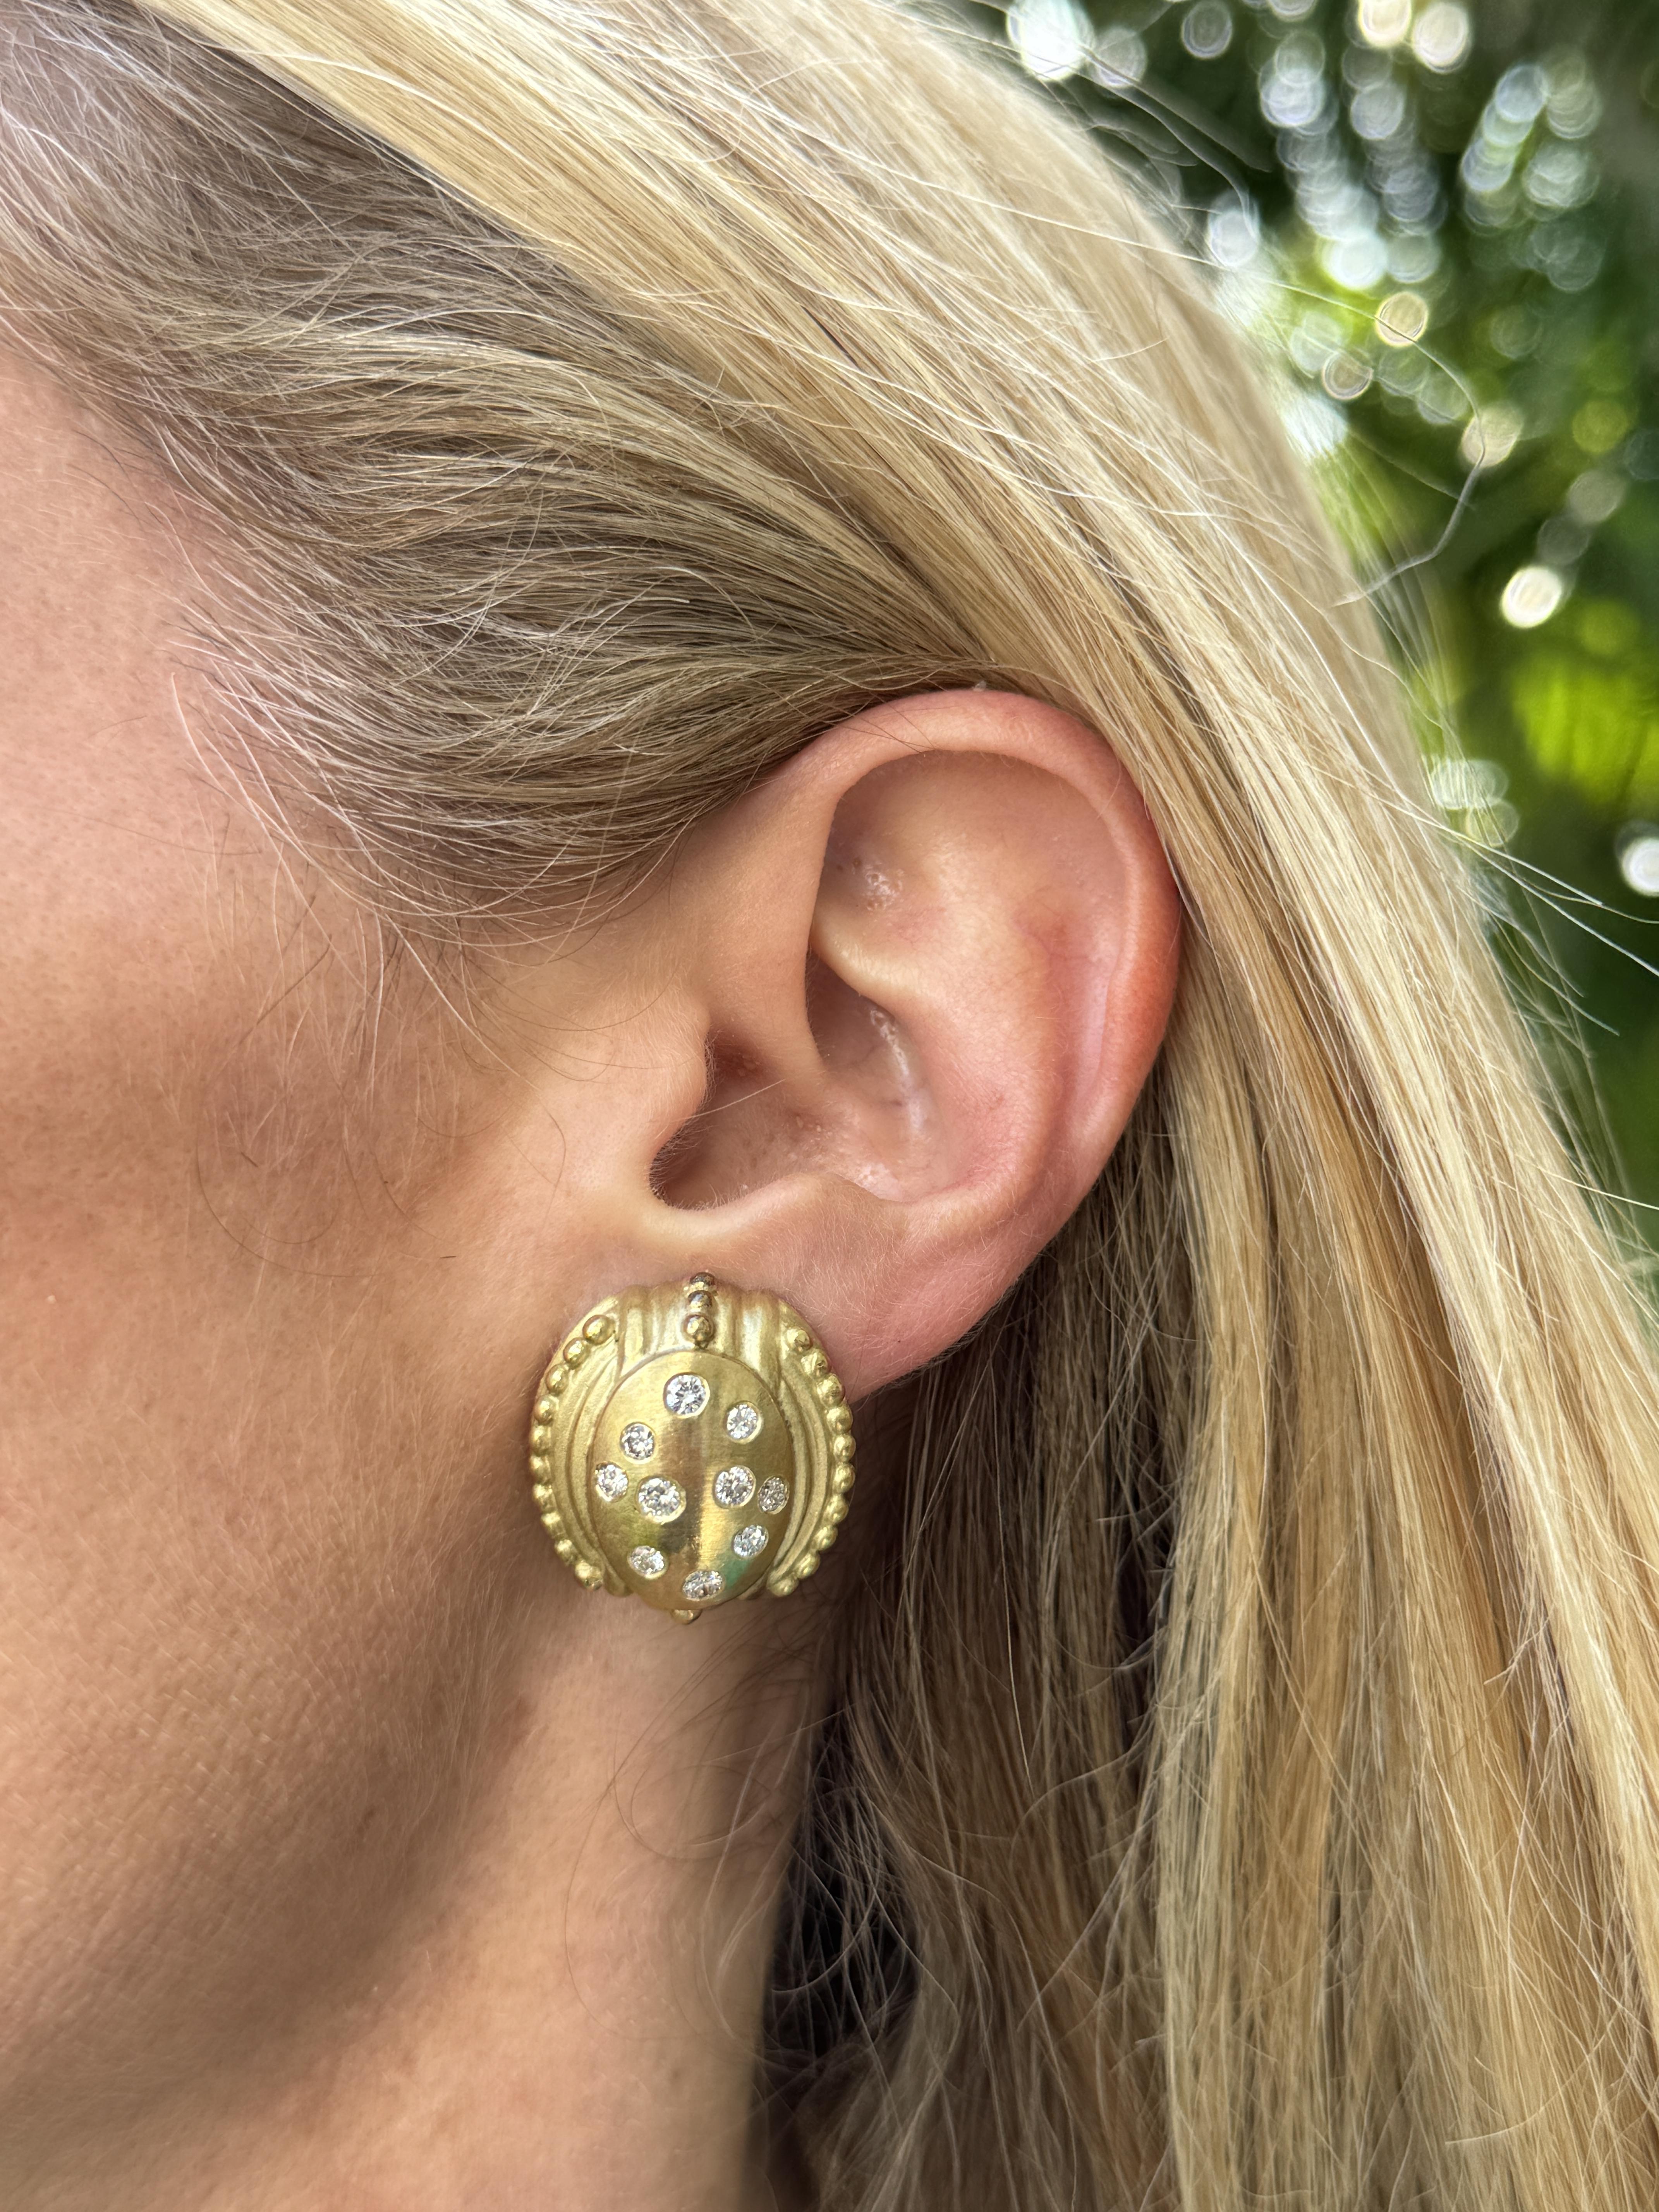 Etruscan style diamond earrings crafted in 18 karat yellow gold. The gold surface of the earrings has a satin finish, which gives it a soft, matte appearance. This finish adds a touch of elegance and sophistication to the earrings  while also